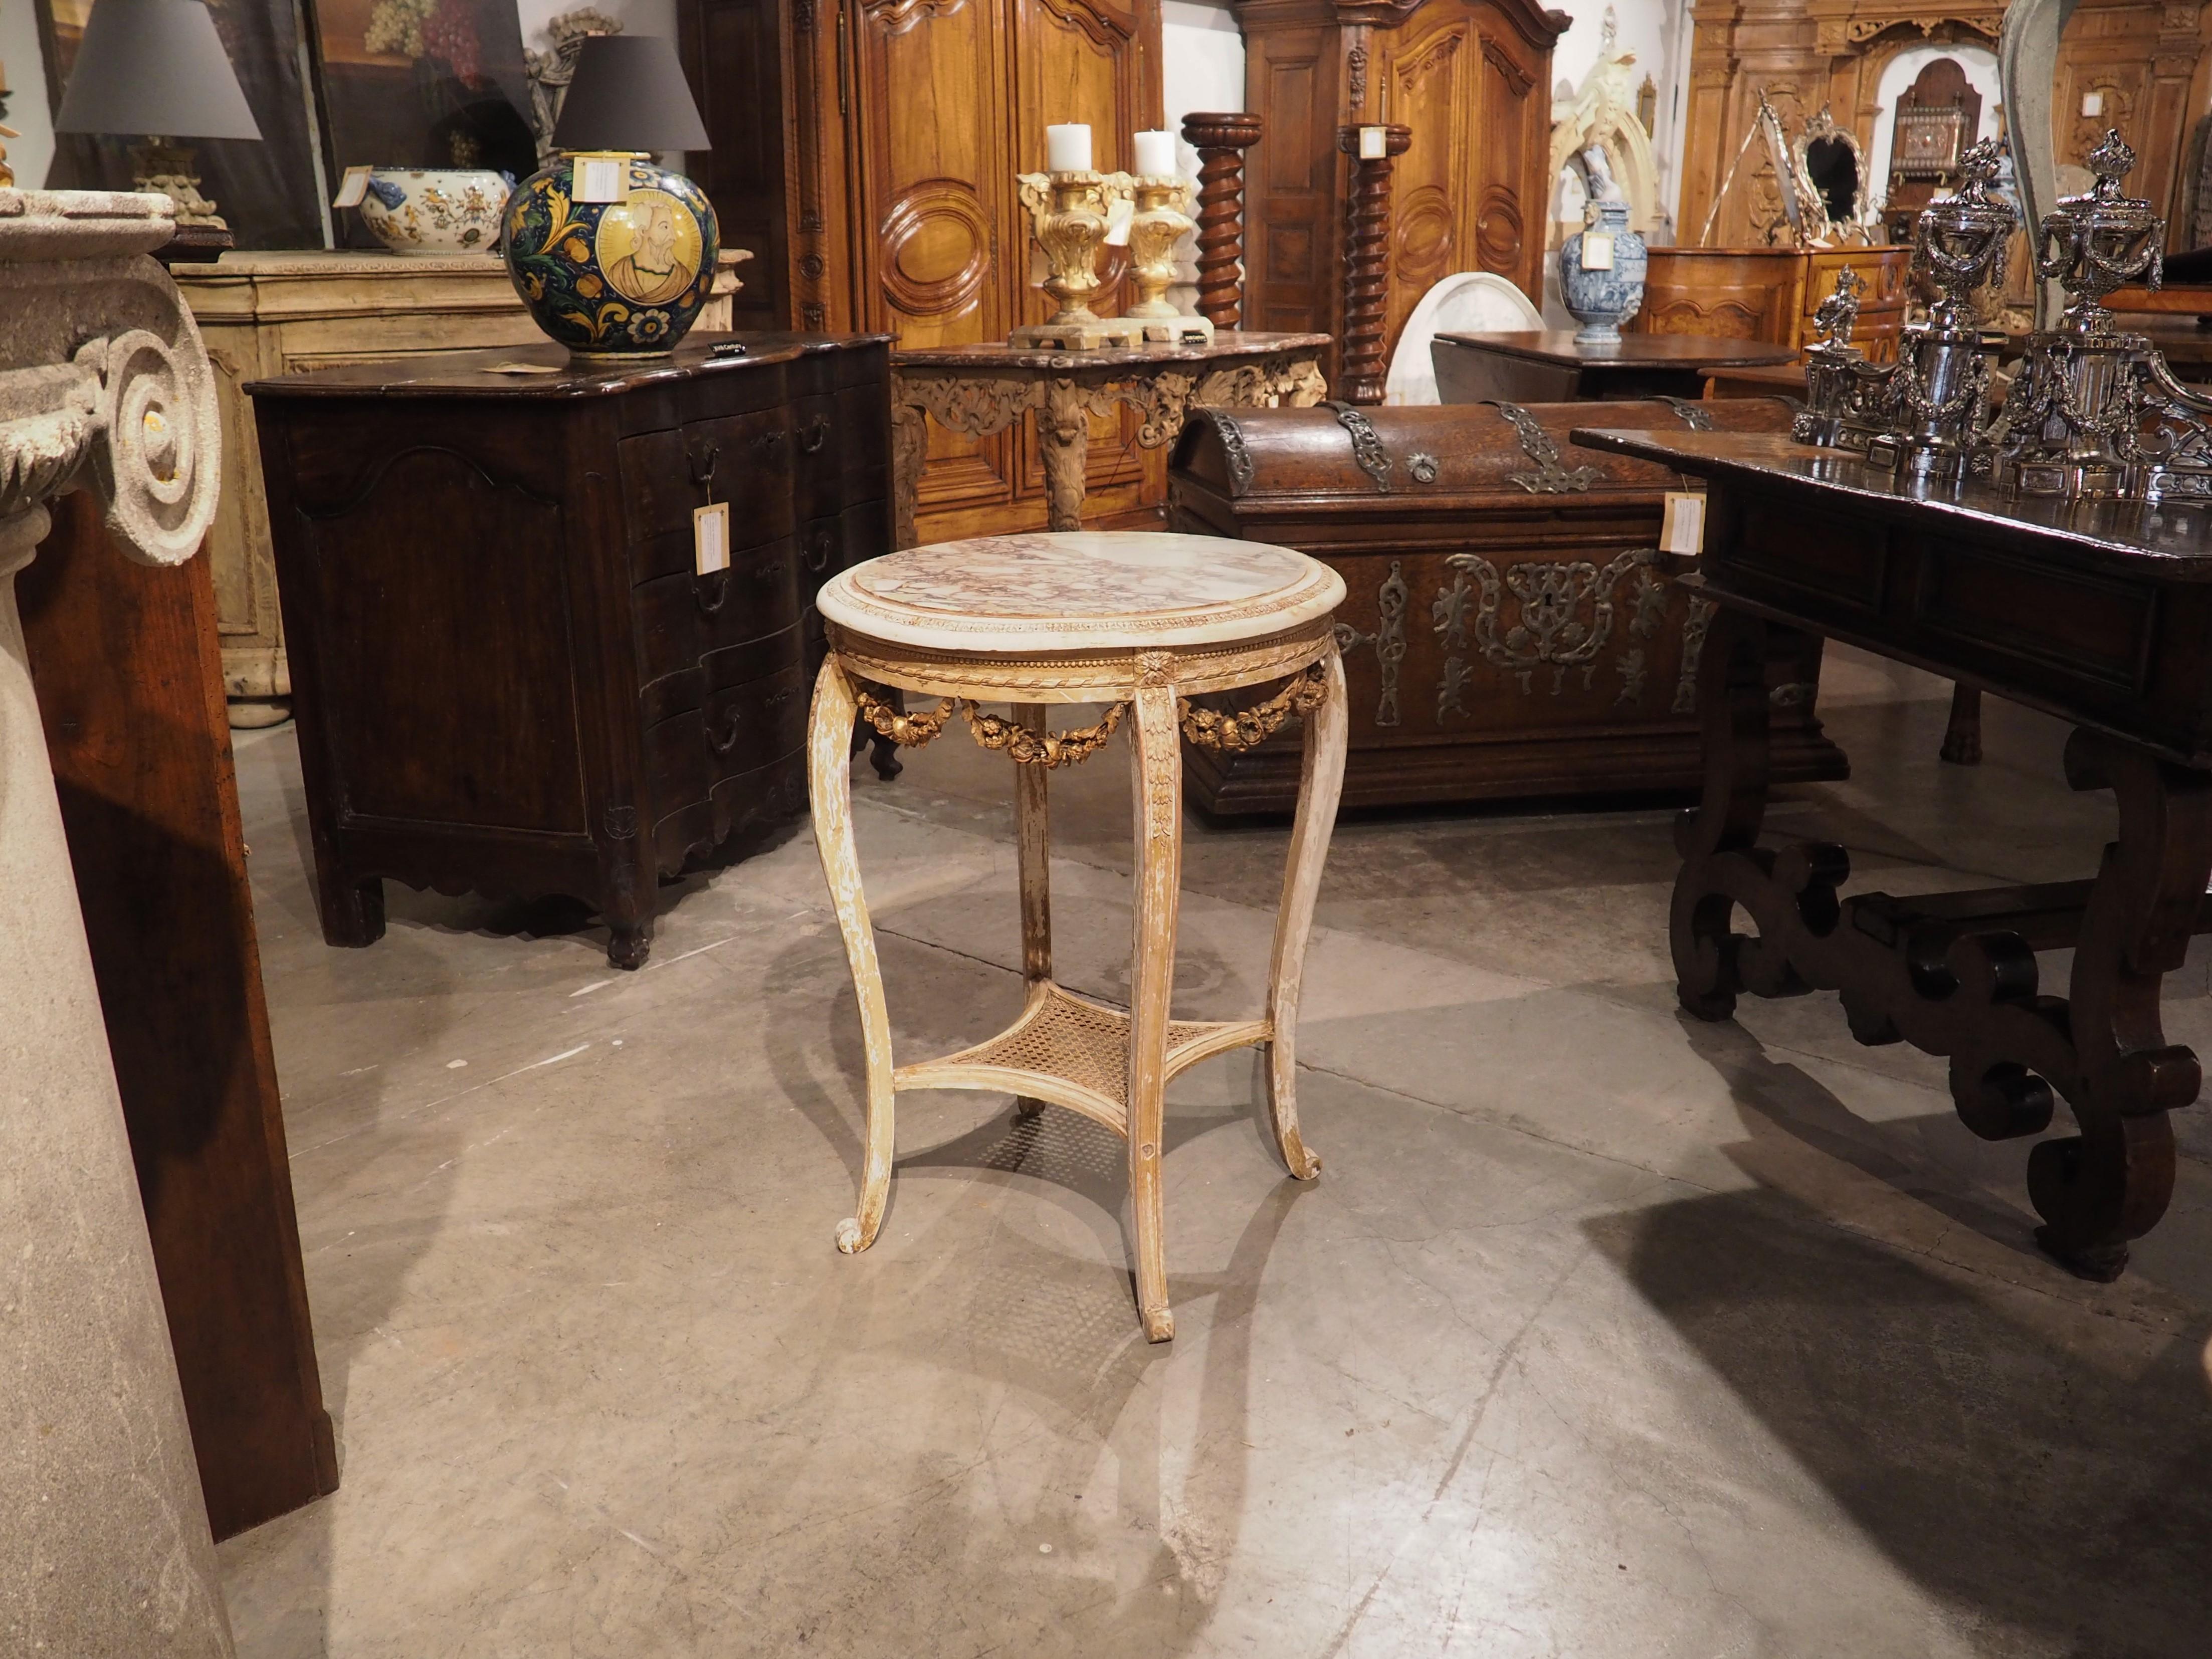 Hand carved in France, circa 1850, this parcel gilt side table with breche marble top is from the Napoleon III period. Sometimes referred to as “Second Empire style”, a hallmark of the period, which incorporates motifs from numerous periods, is to